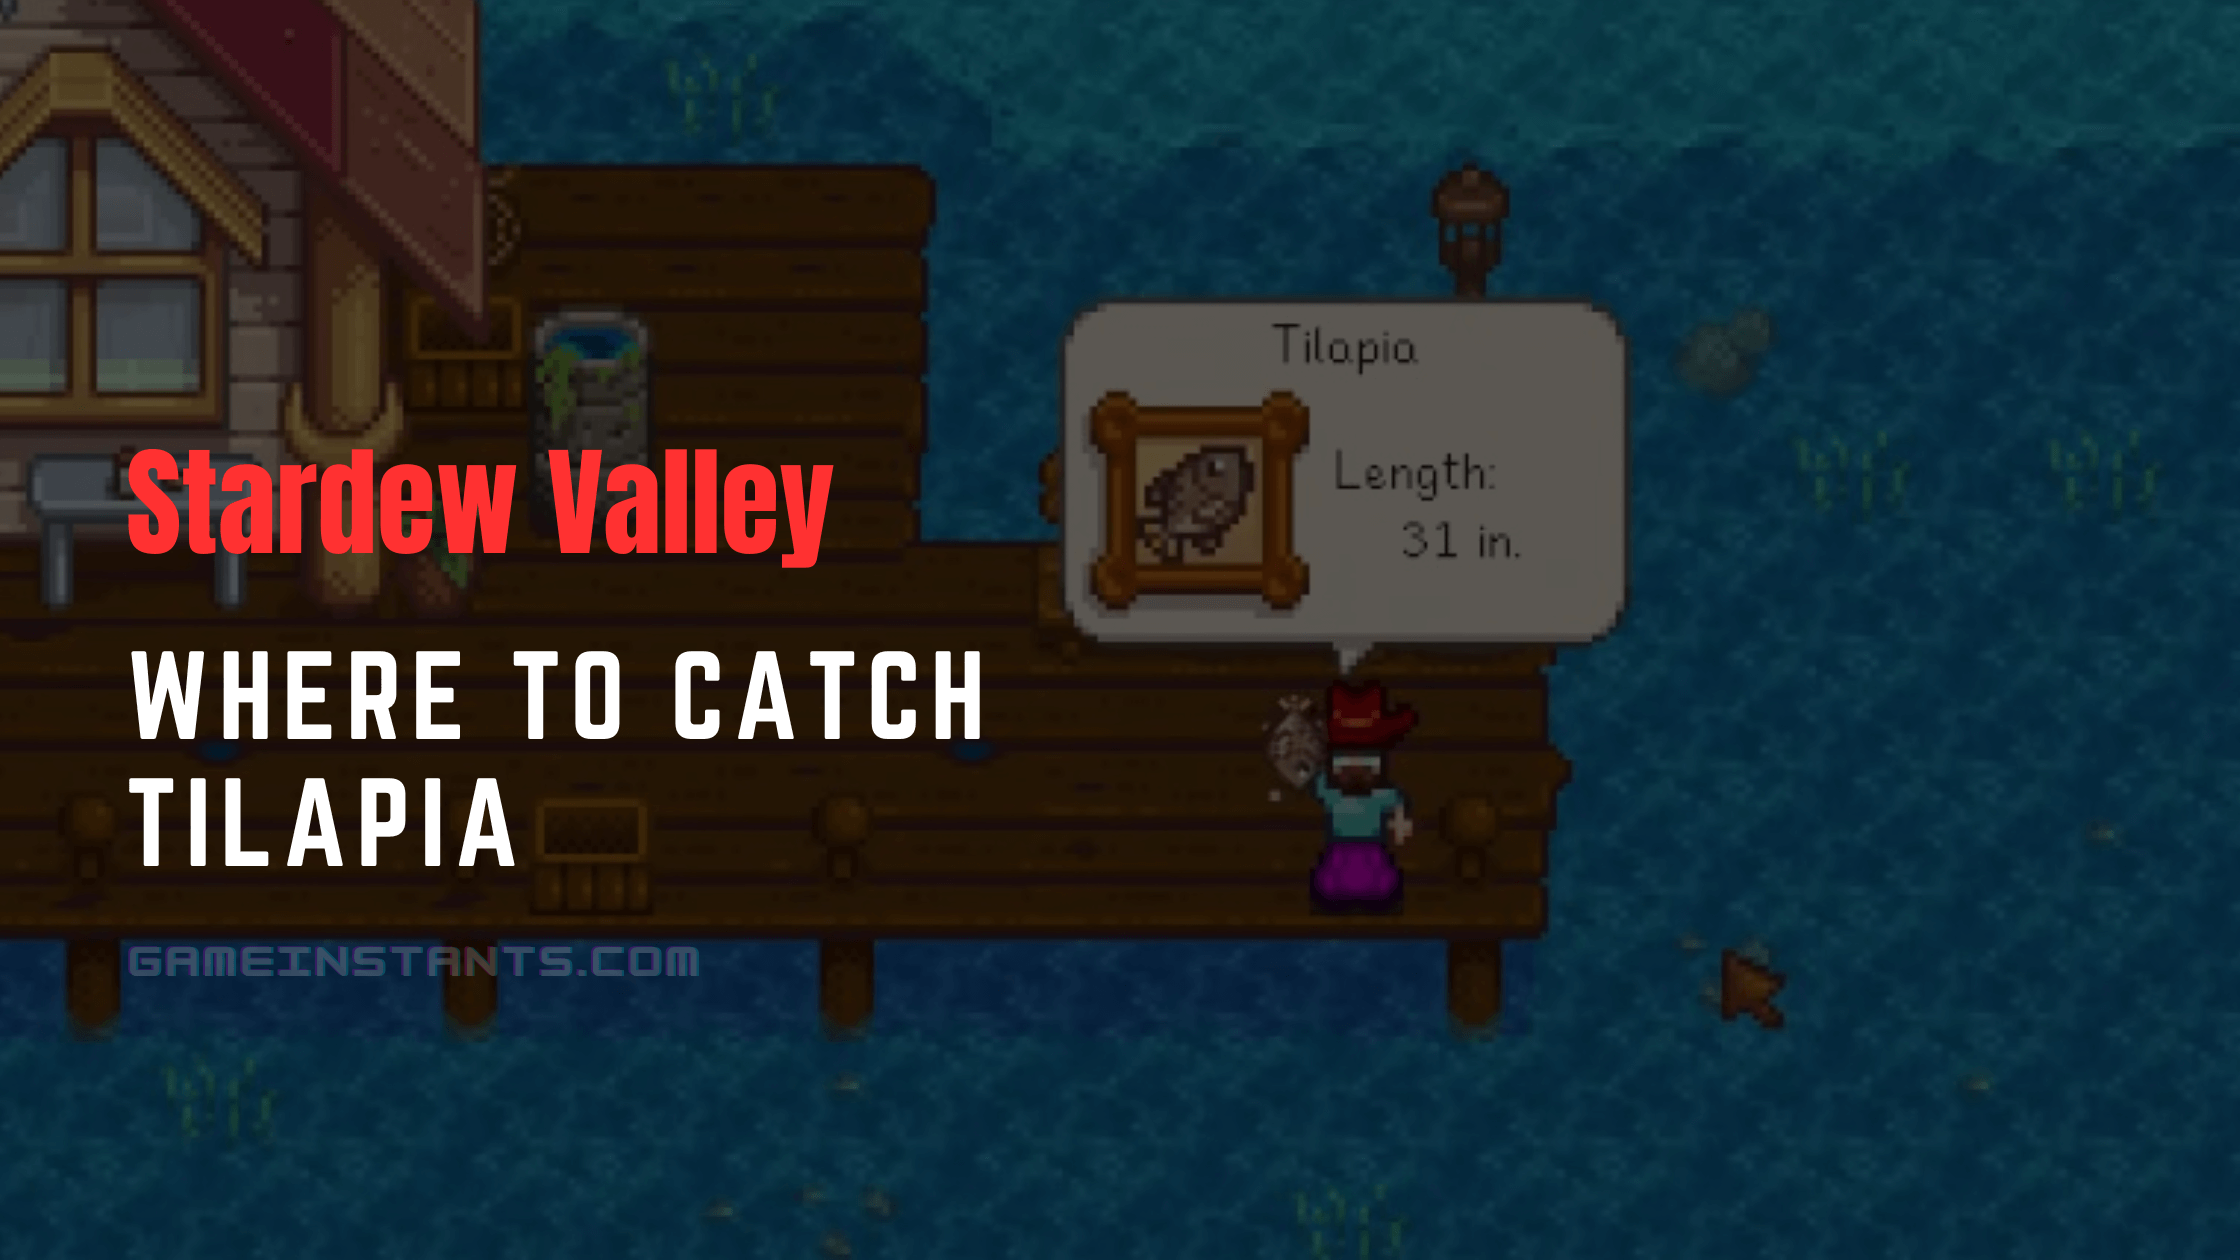 Stardew Valley Where To Catch Tilapia